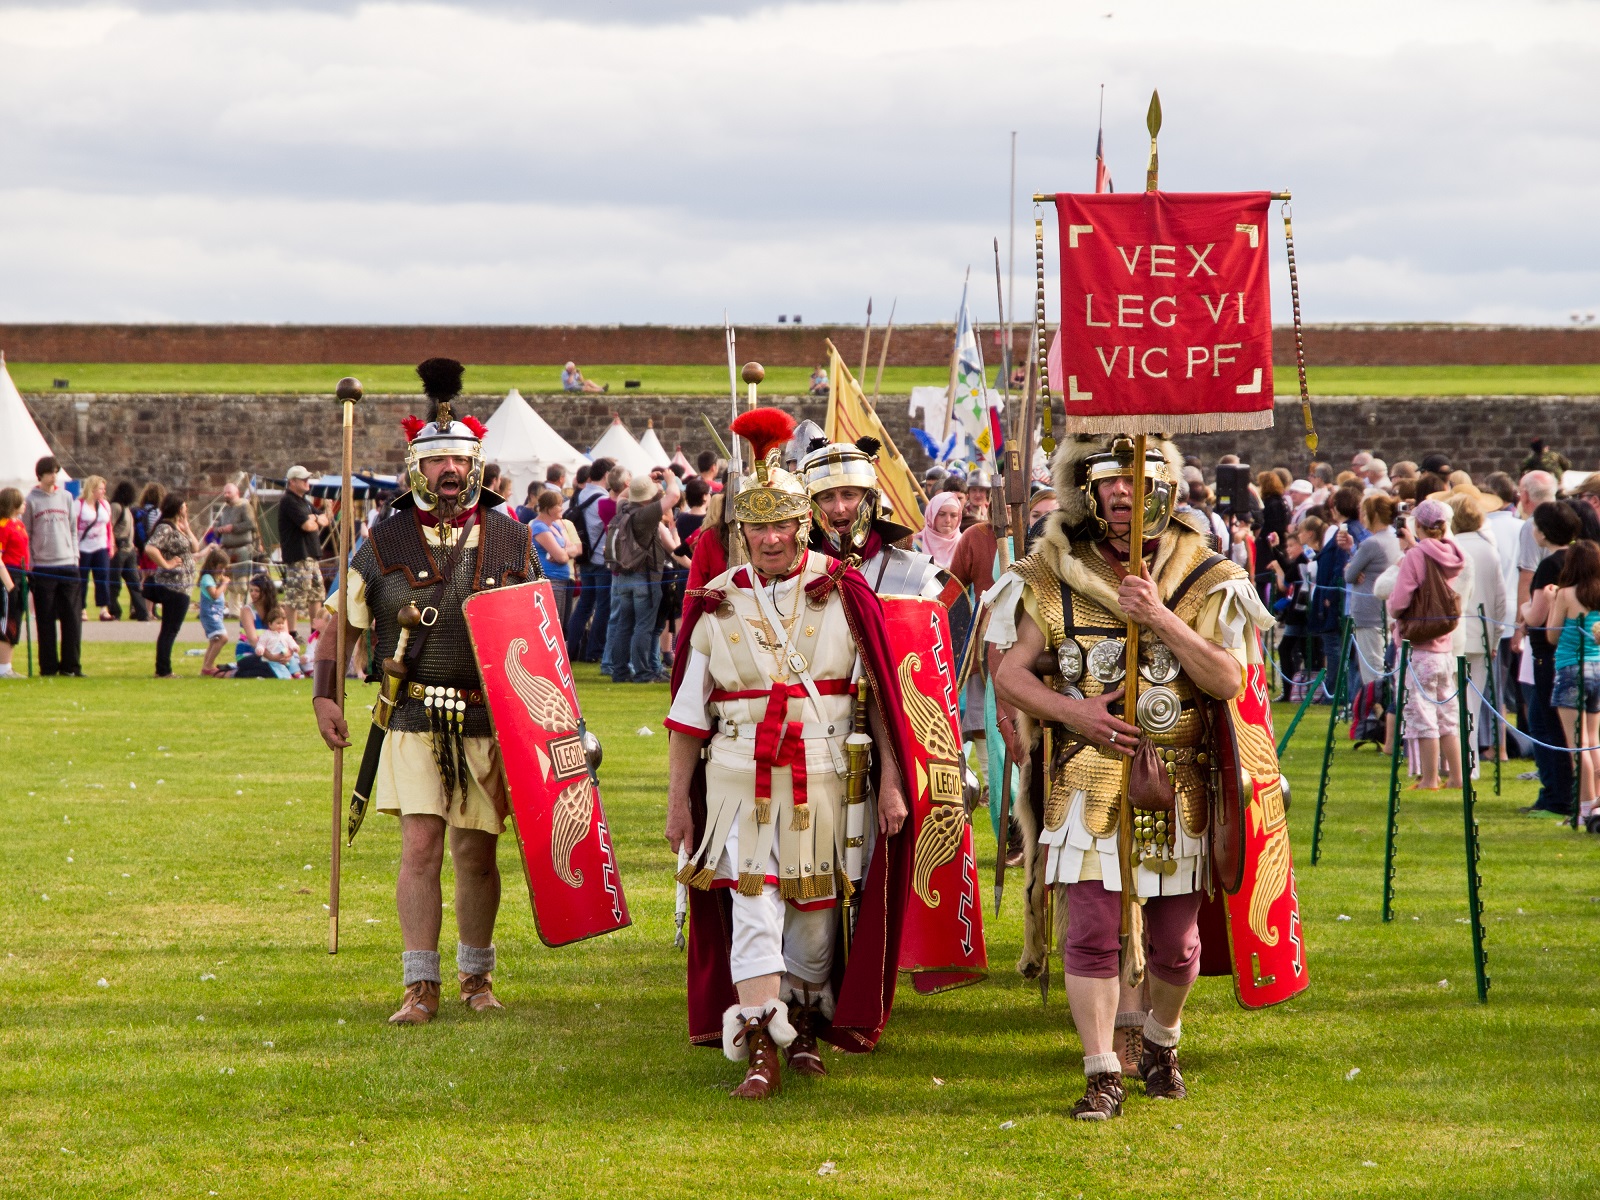 A group of people dressed in re-enactment clothes as Roman soldiers for Celebration of the Centuries